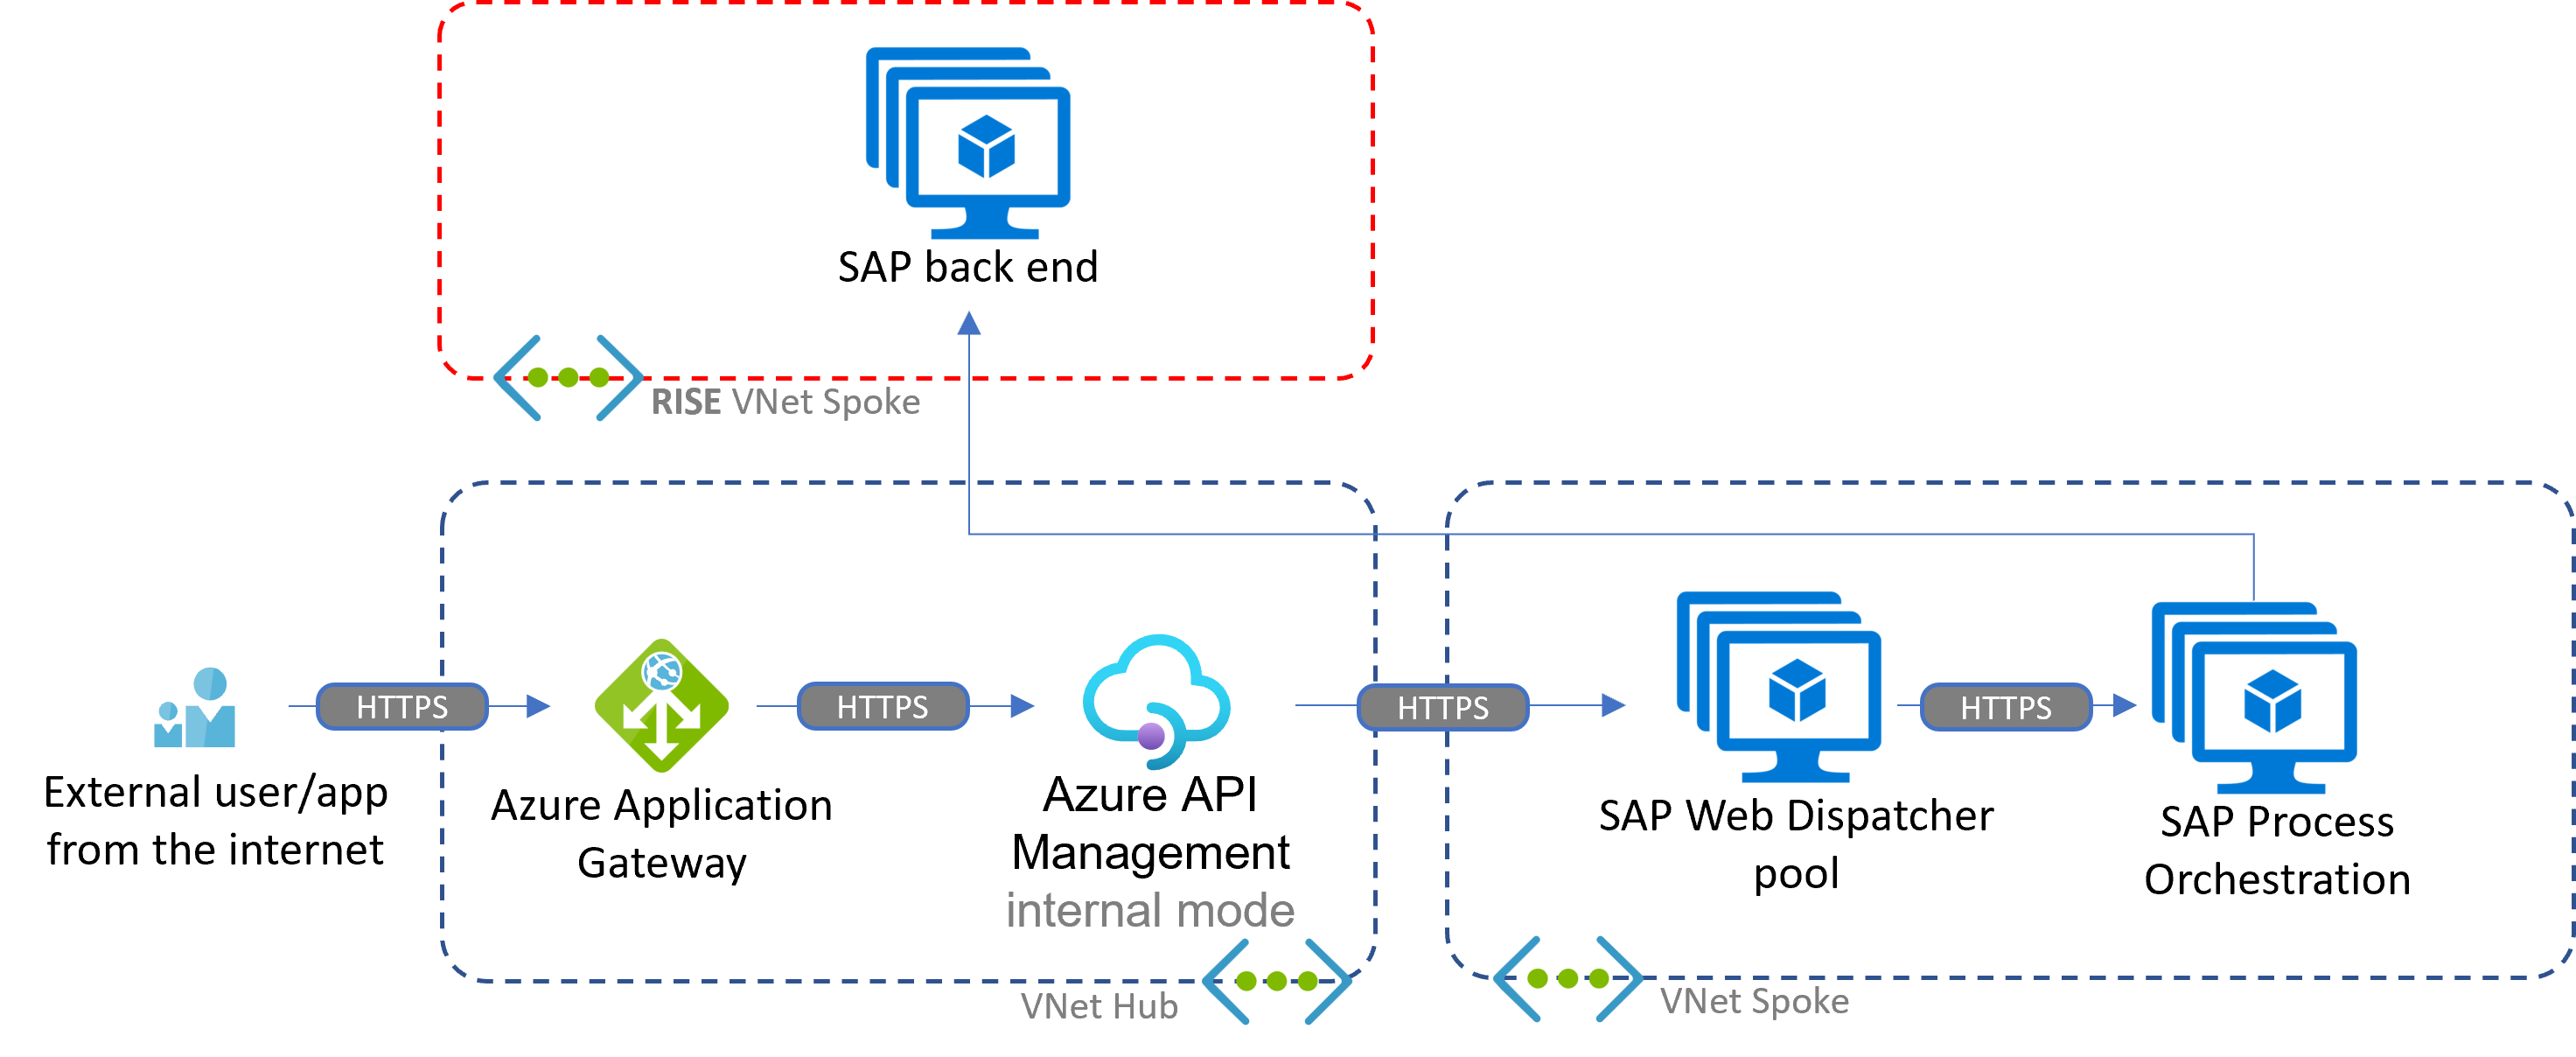 Diagram that shows an inbound scenario with Azure API Management and self-hosted SAP Process Orchestration on Azure in the RISE context.